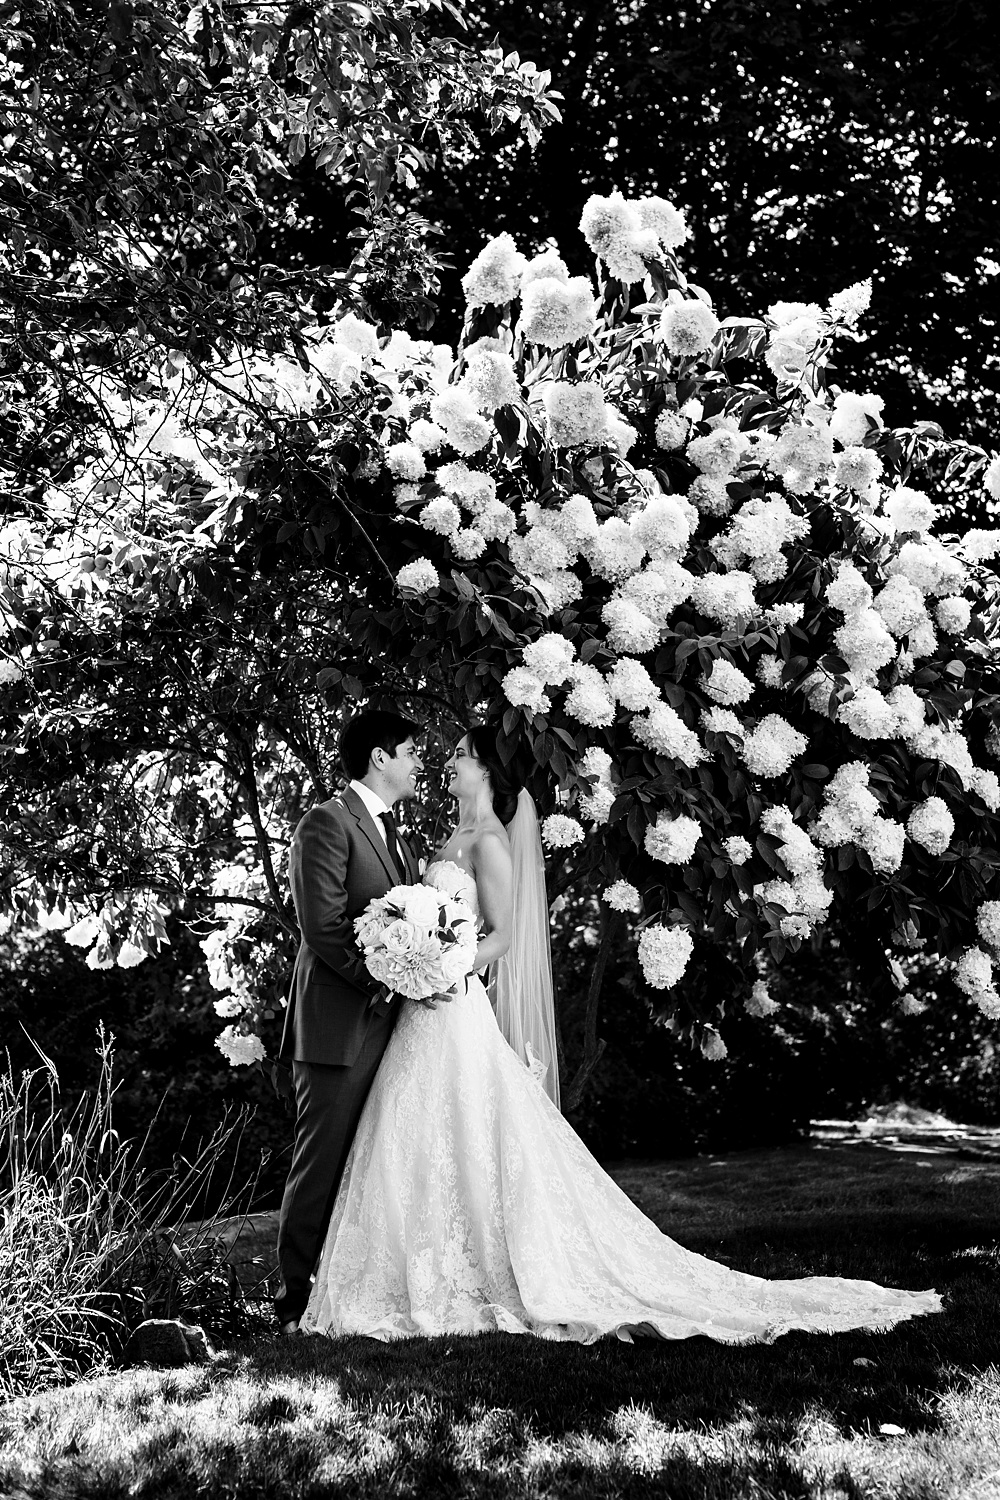 The newlyweds hang out underneath a Hydrangea bush